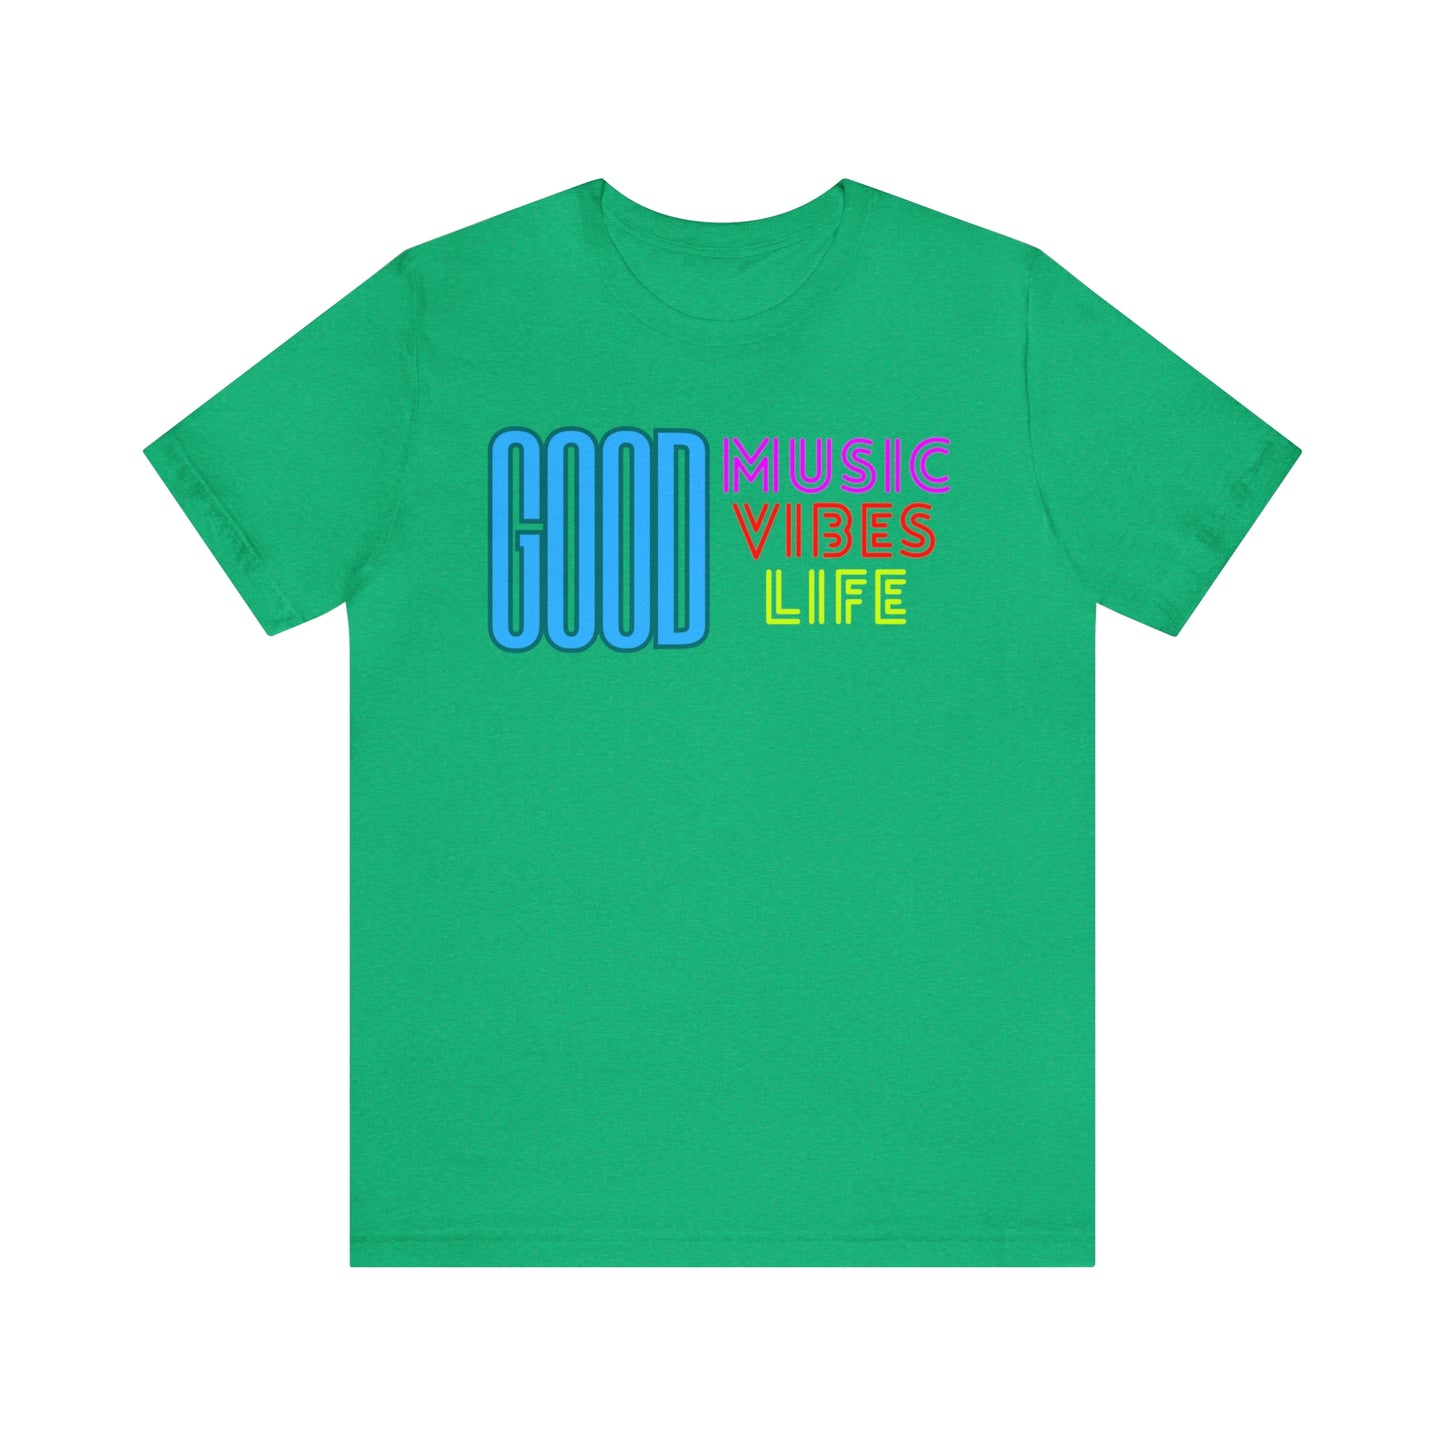 A T-shirt with the text "Good music vibes life" in neon colors